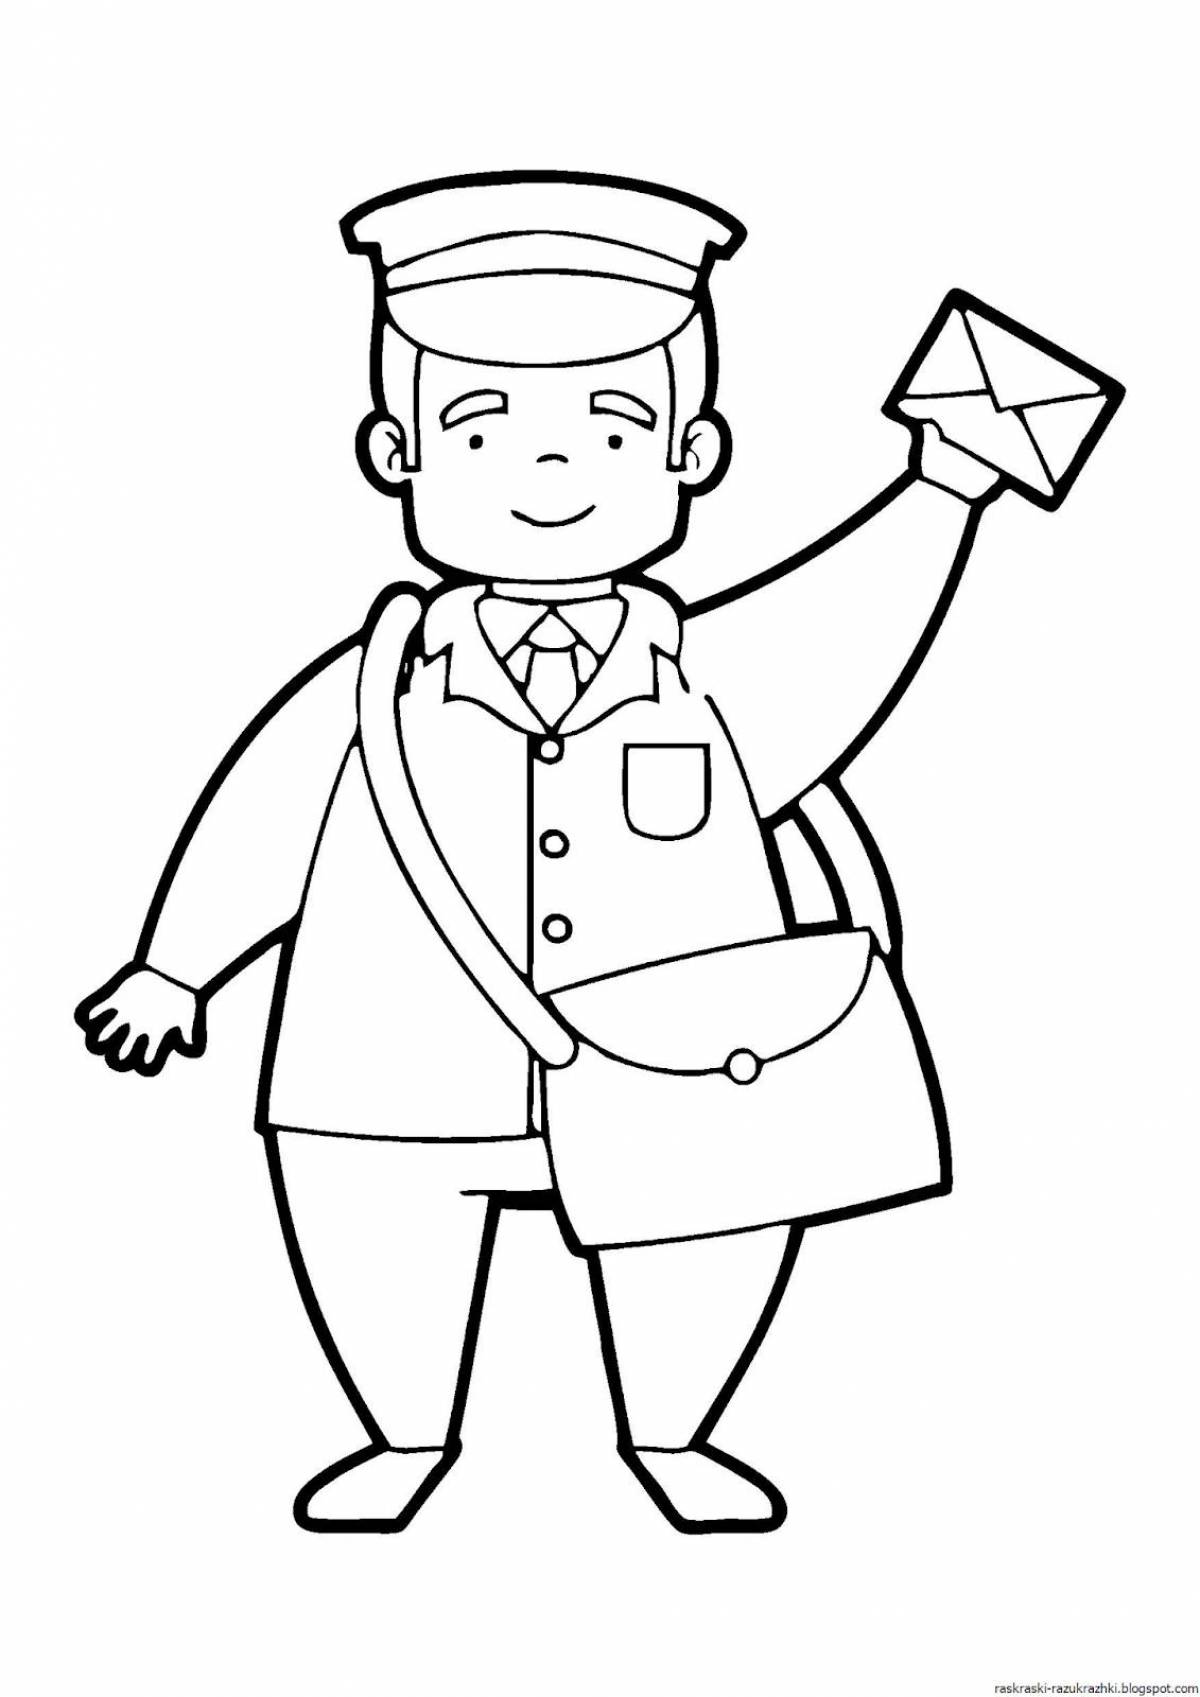 Fun coloring pages of professions for children 7 years old